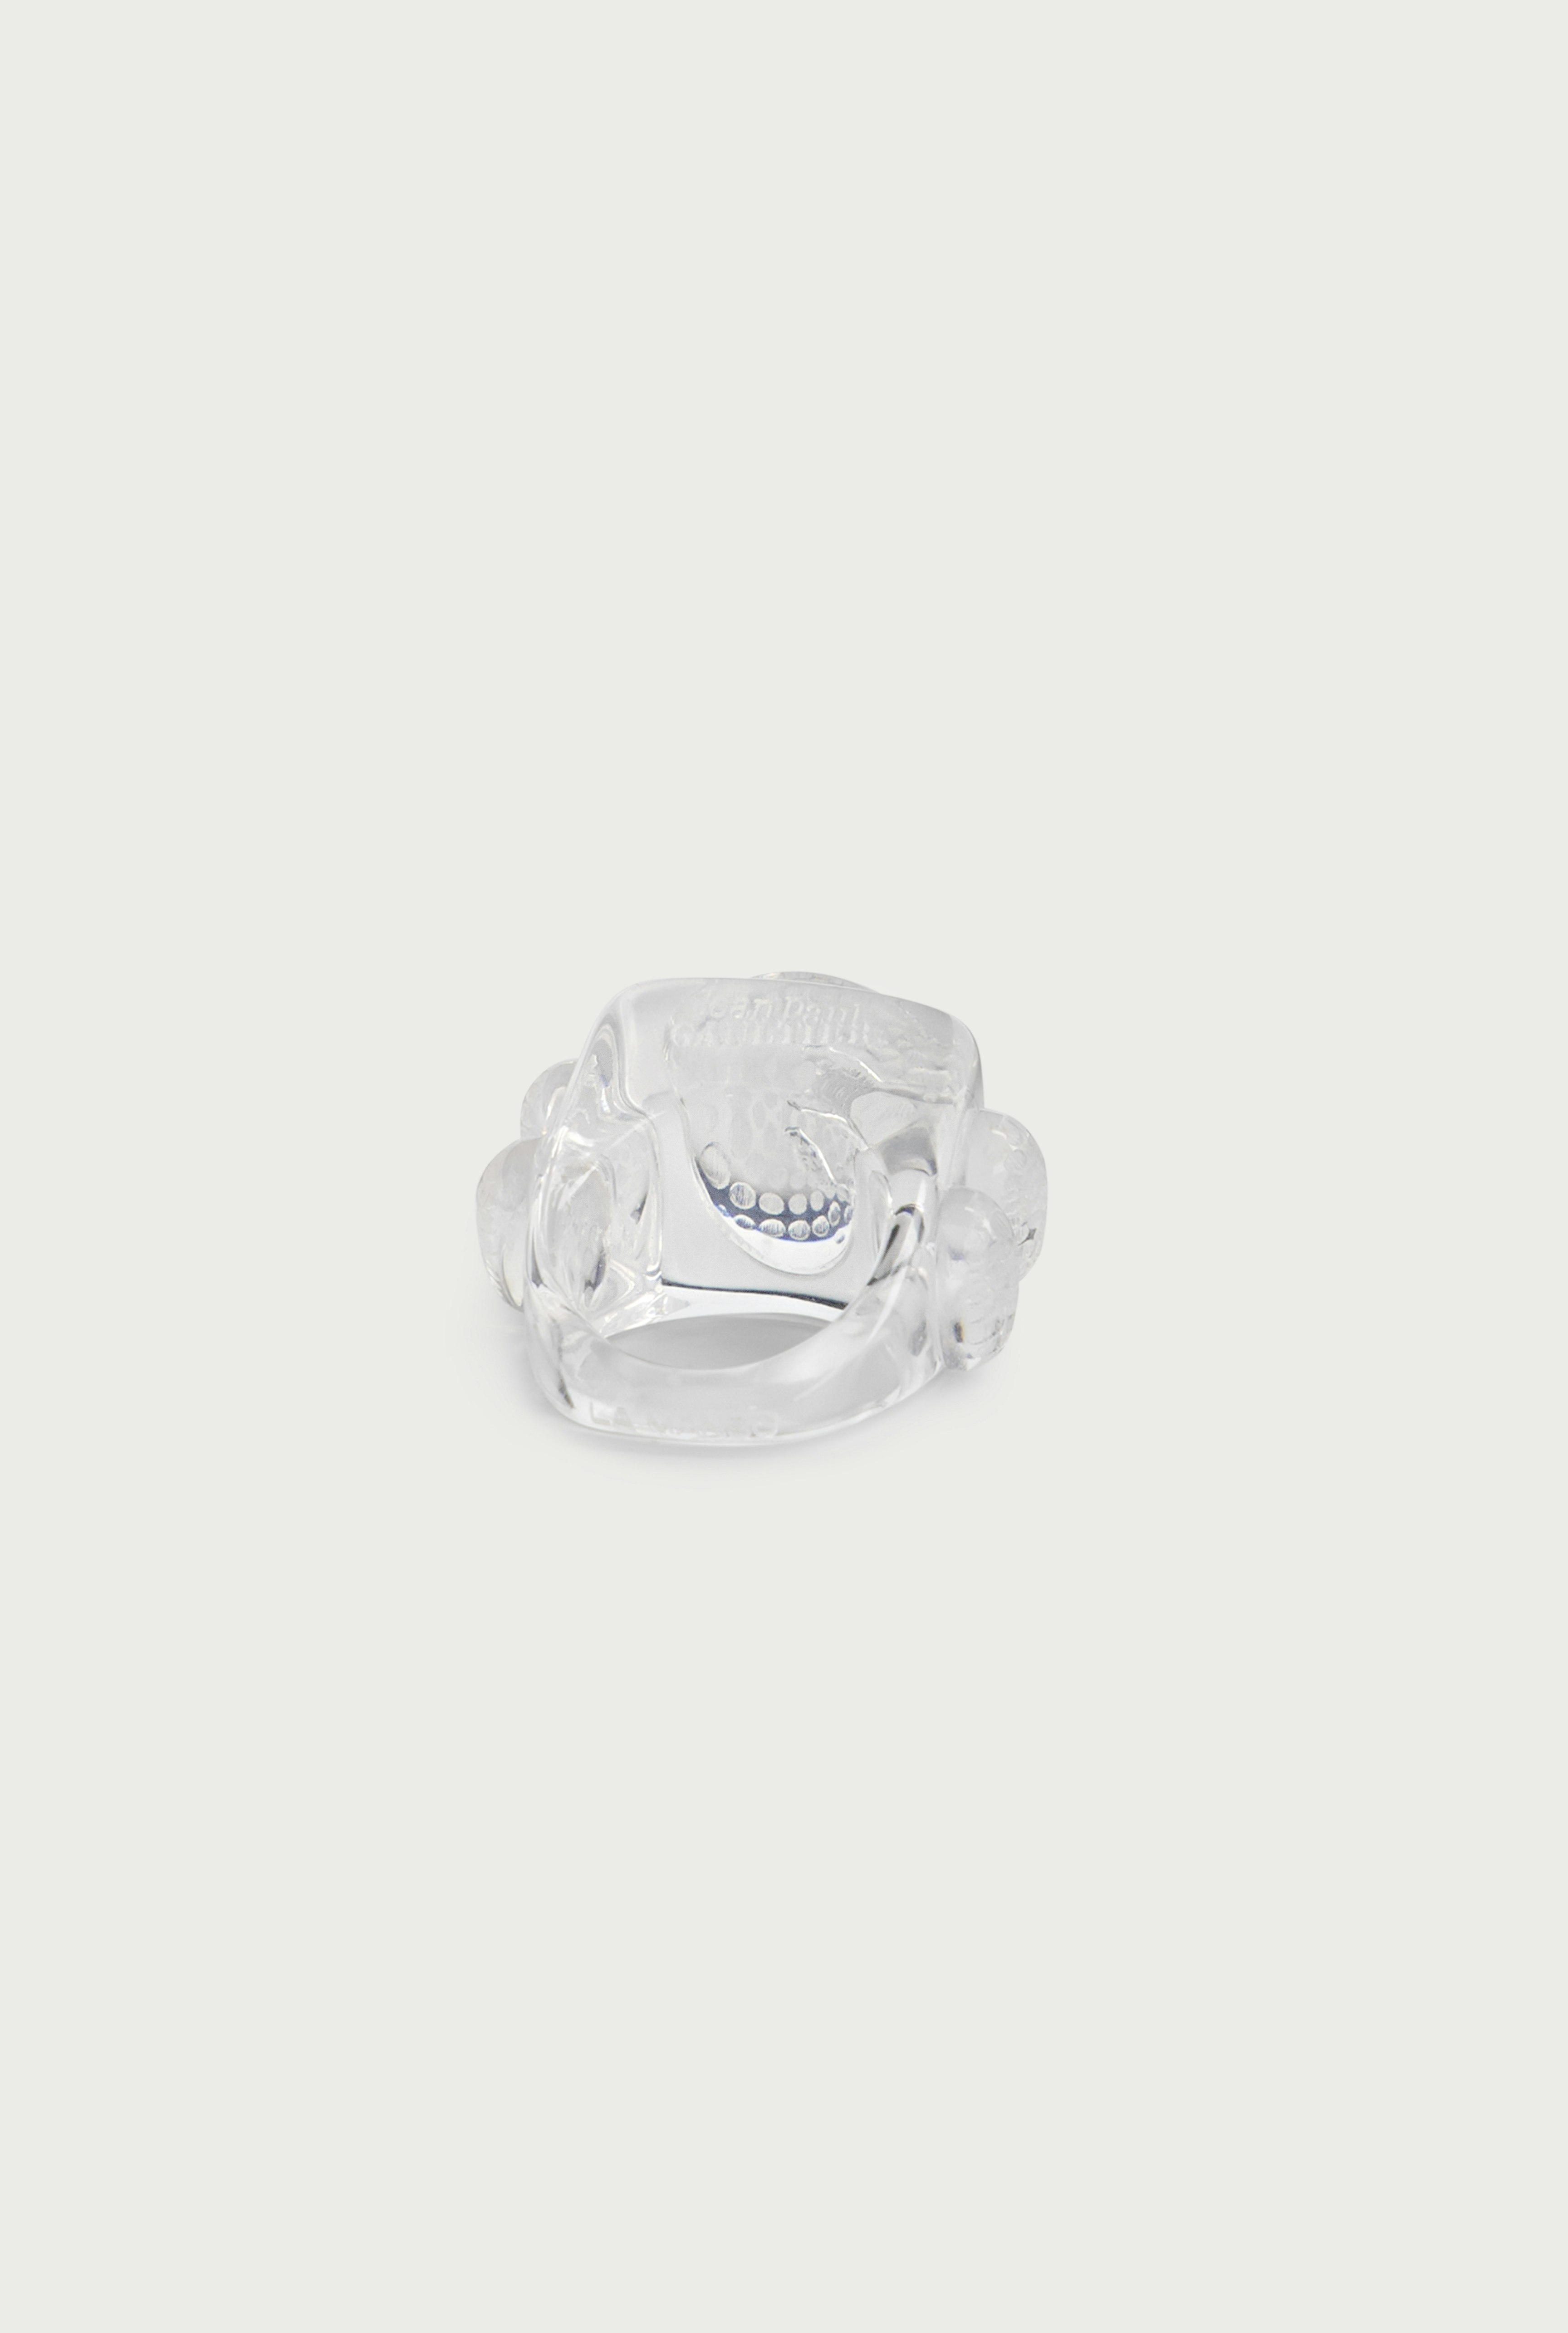 The Ice Cube Ring